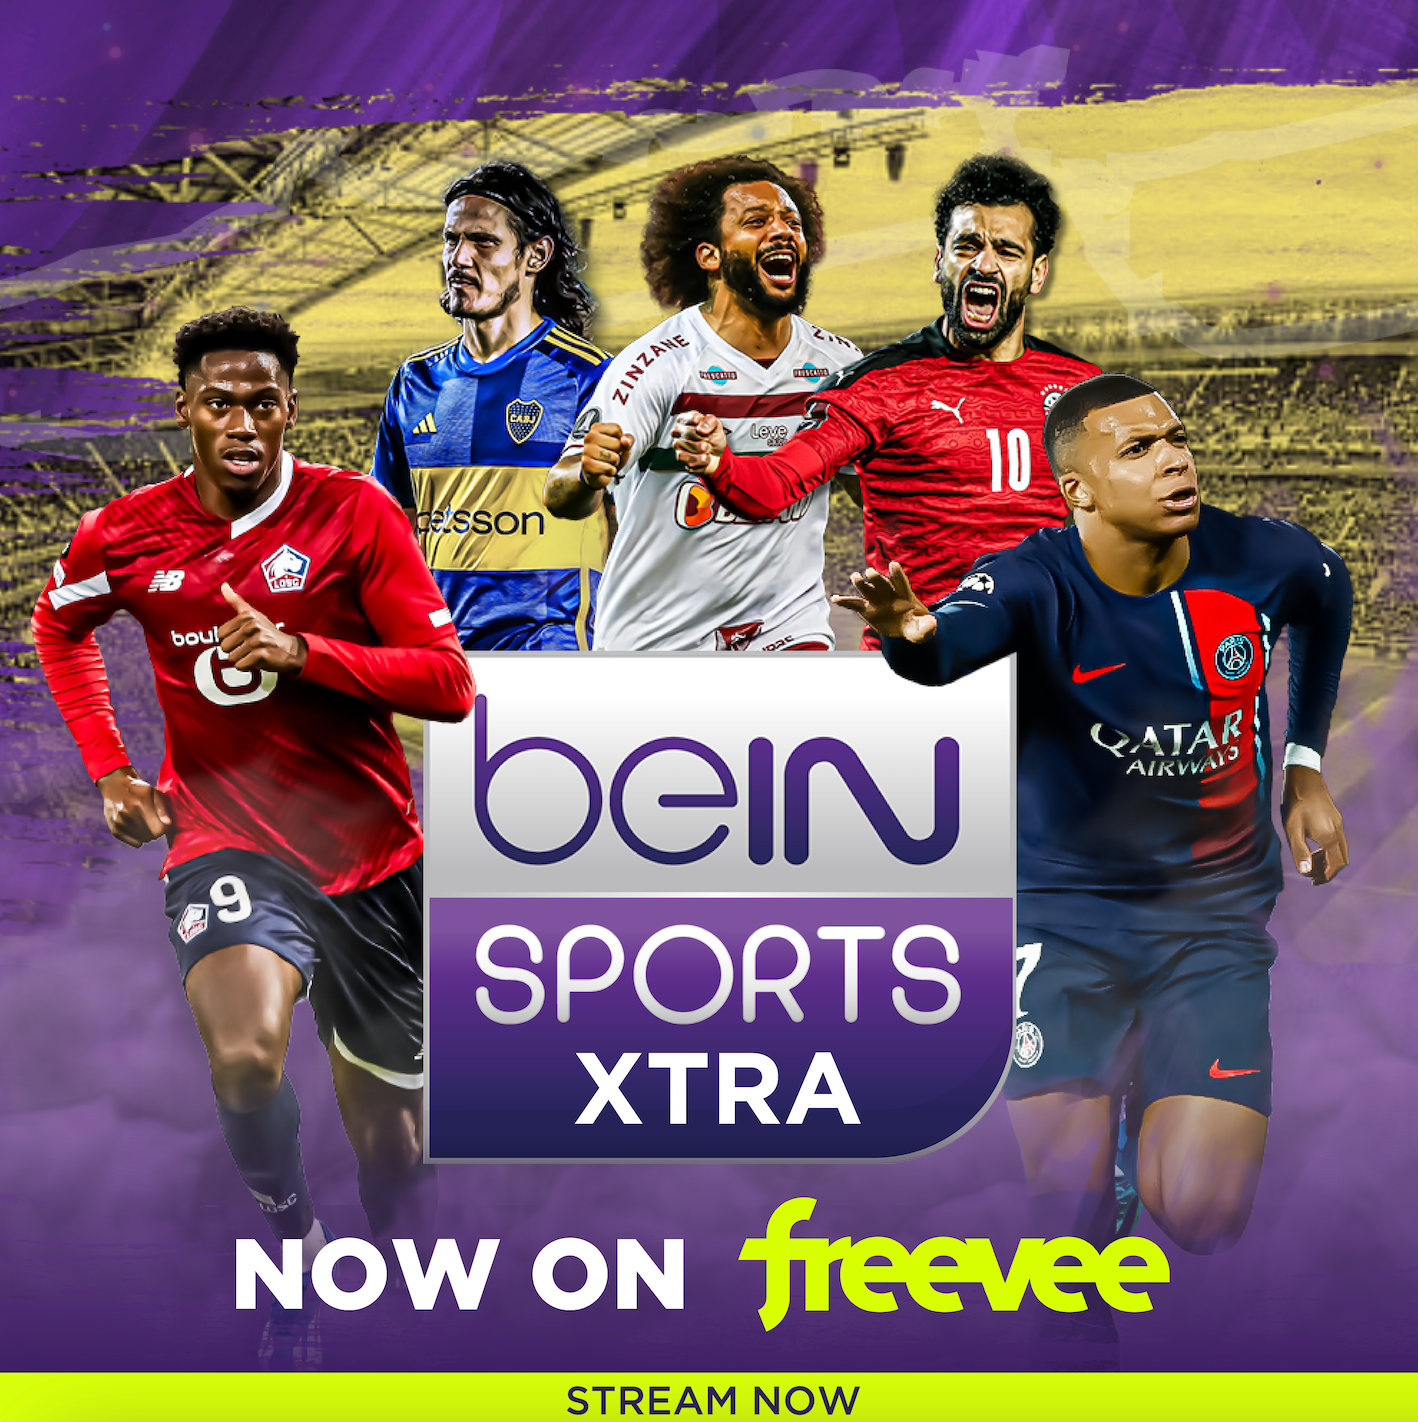 Amazon Fire TV Channels Launch beIN SPORTS XTRA and VOD Live Sports Content